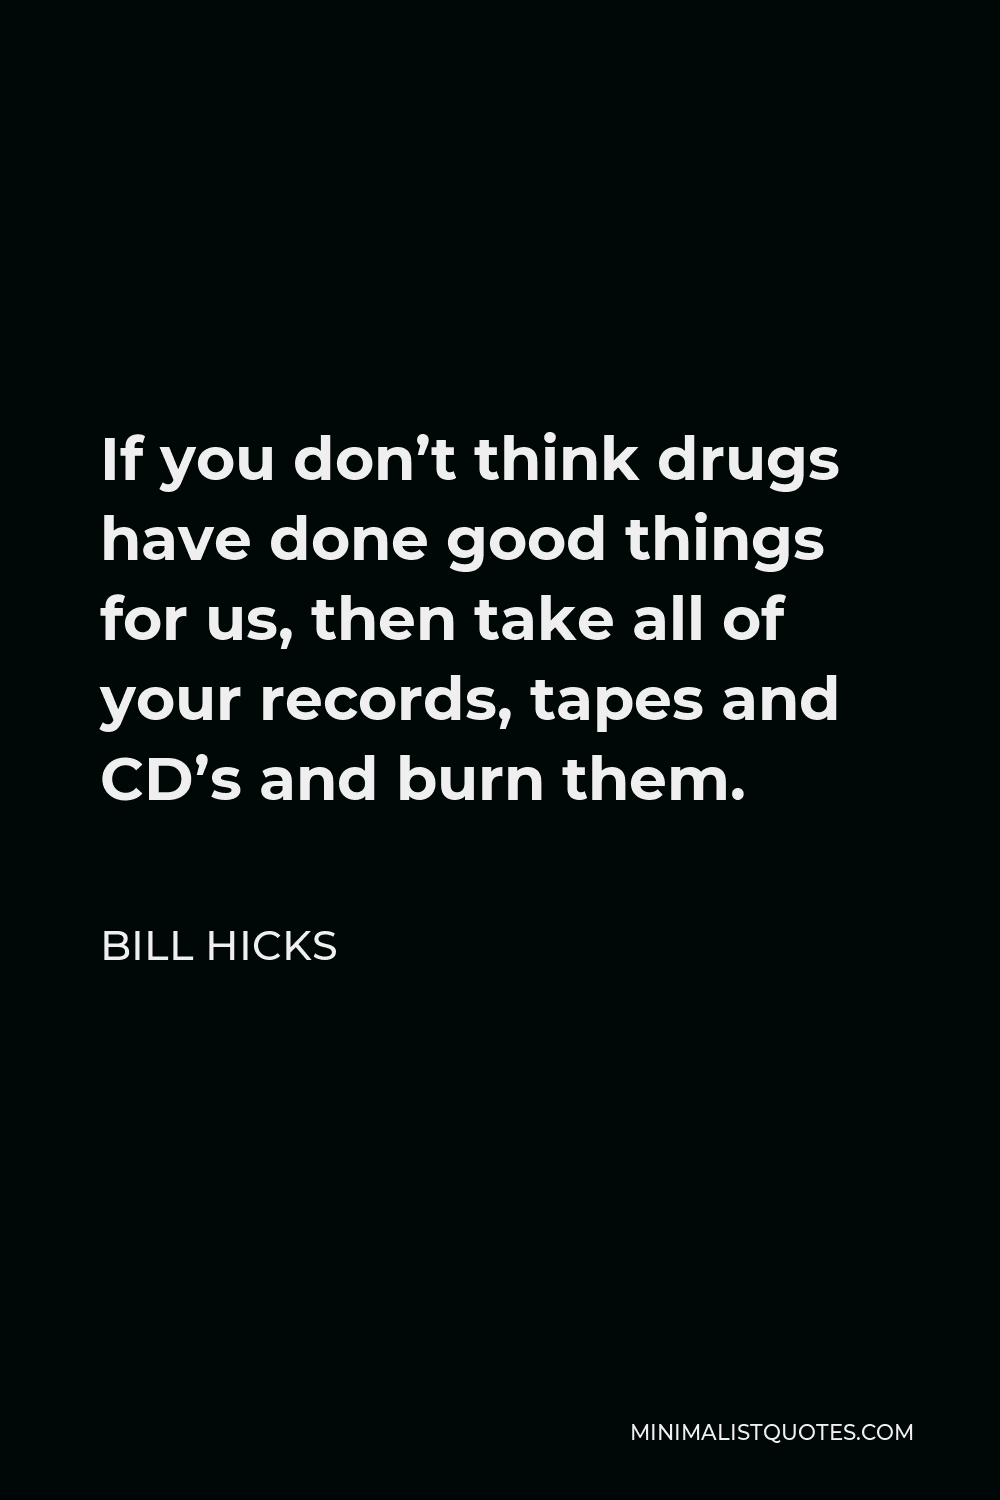 Bill Hicks Quote - If you don’t think drugs have done good things for us, then take all of your records, tapes and CD’s and burn them.